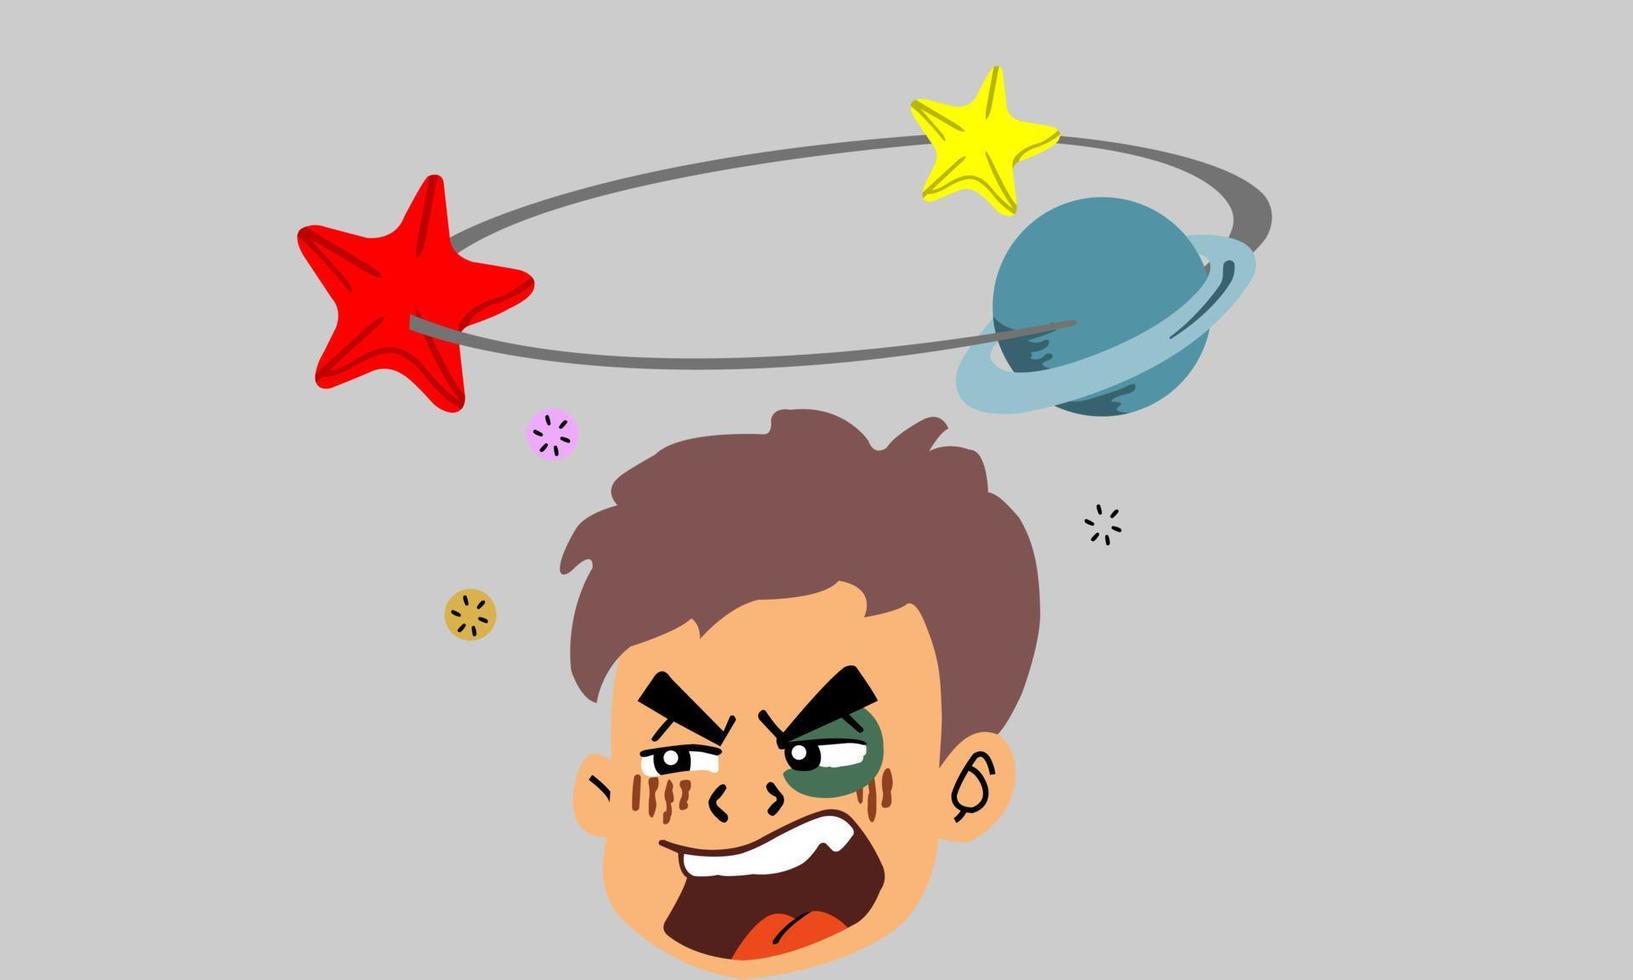 Being hurt around the eyes. Saw a star swirling around above his head. An angry face. vector